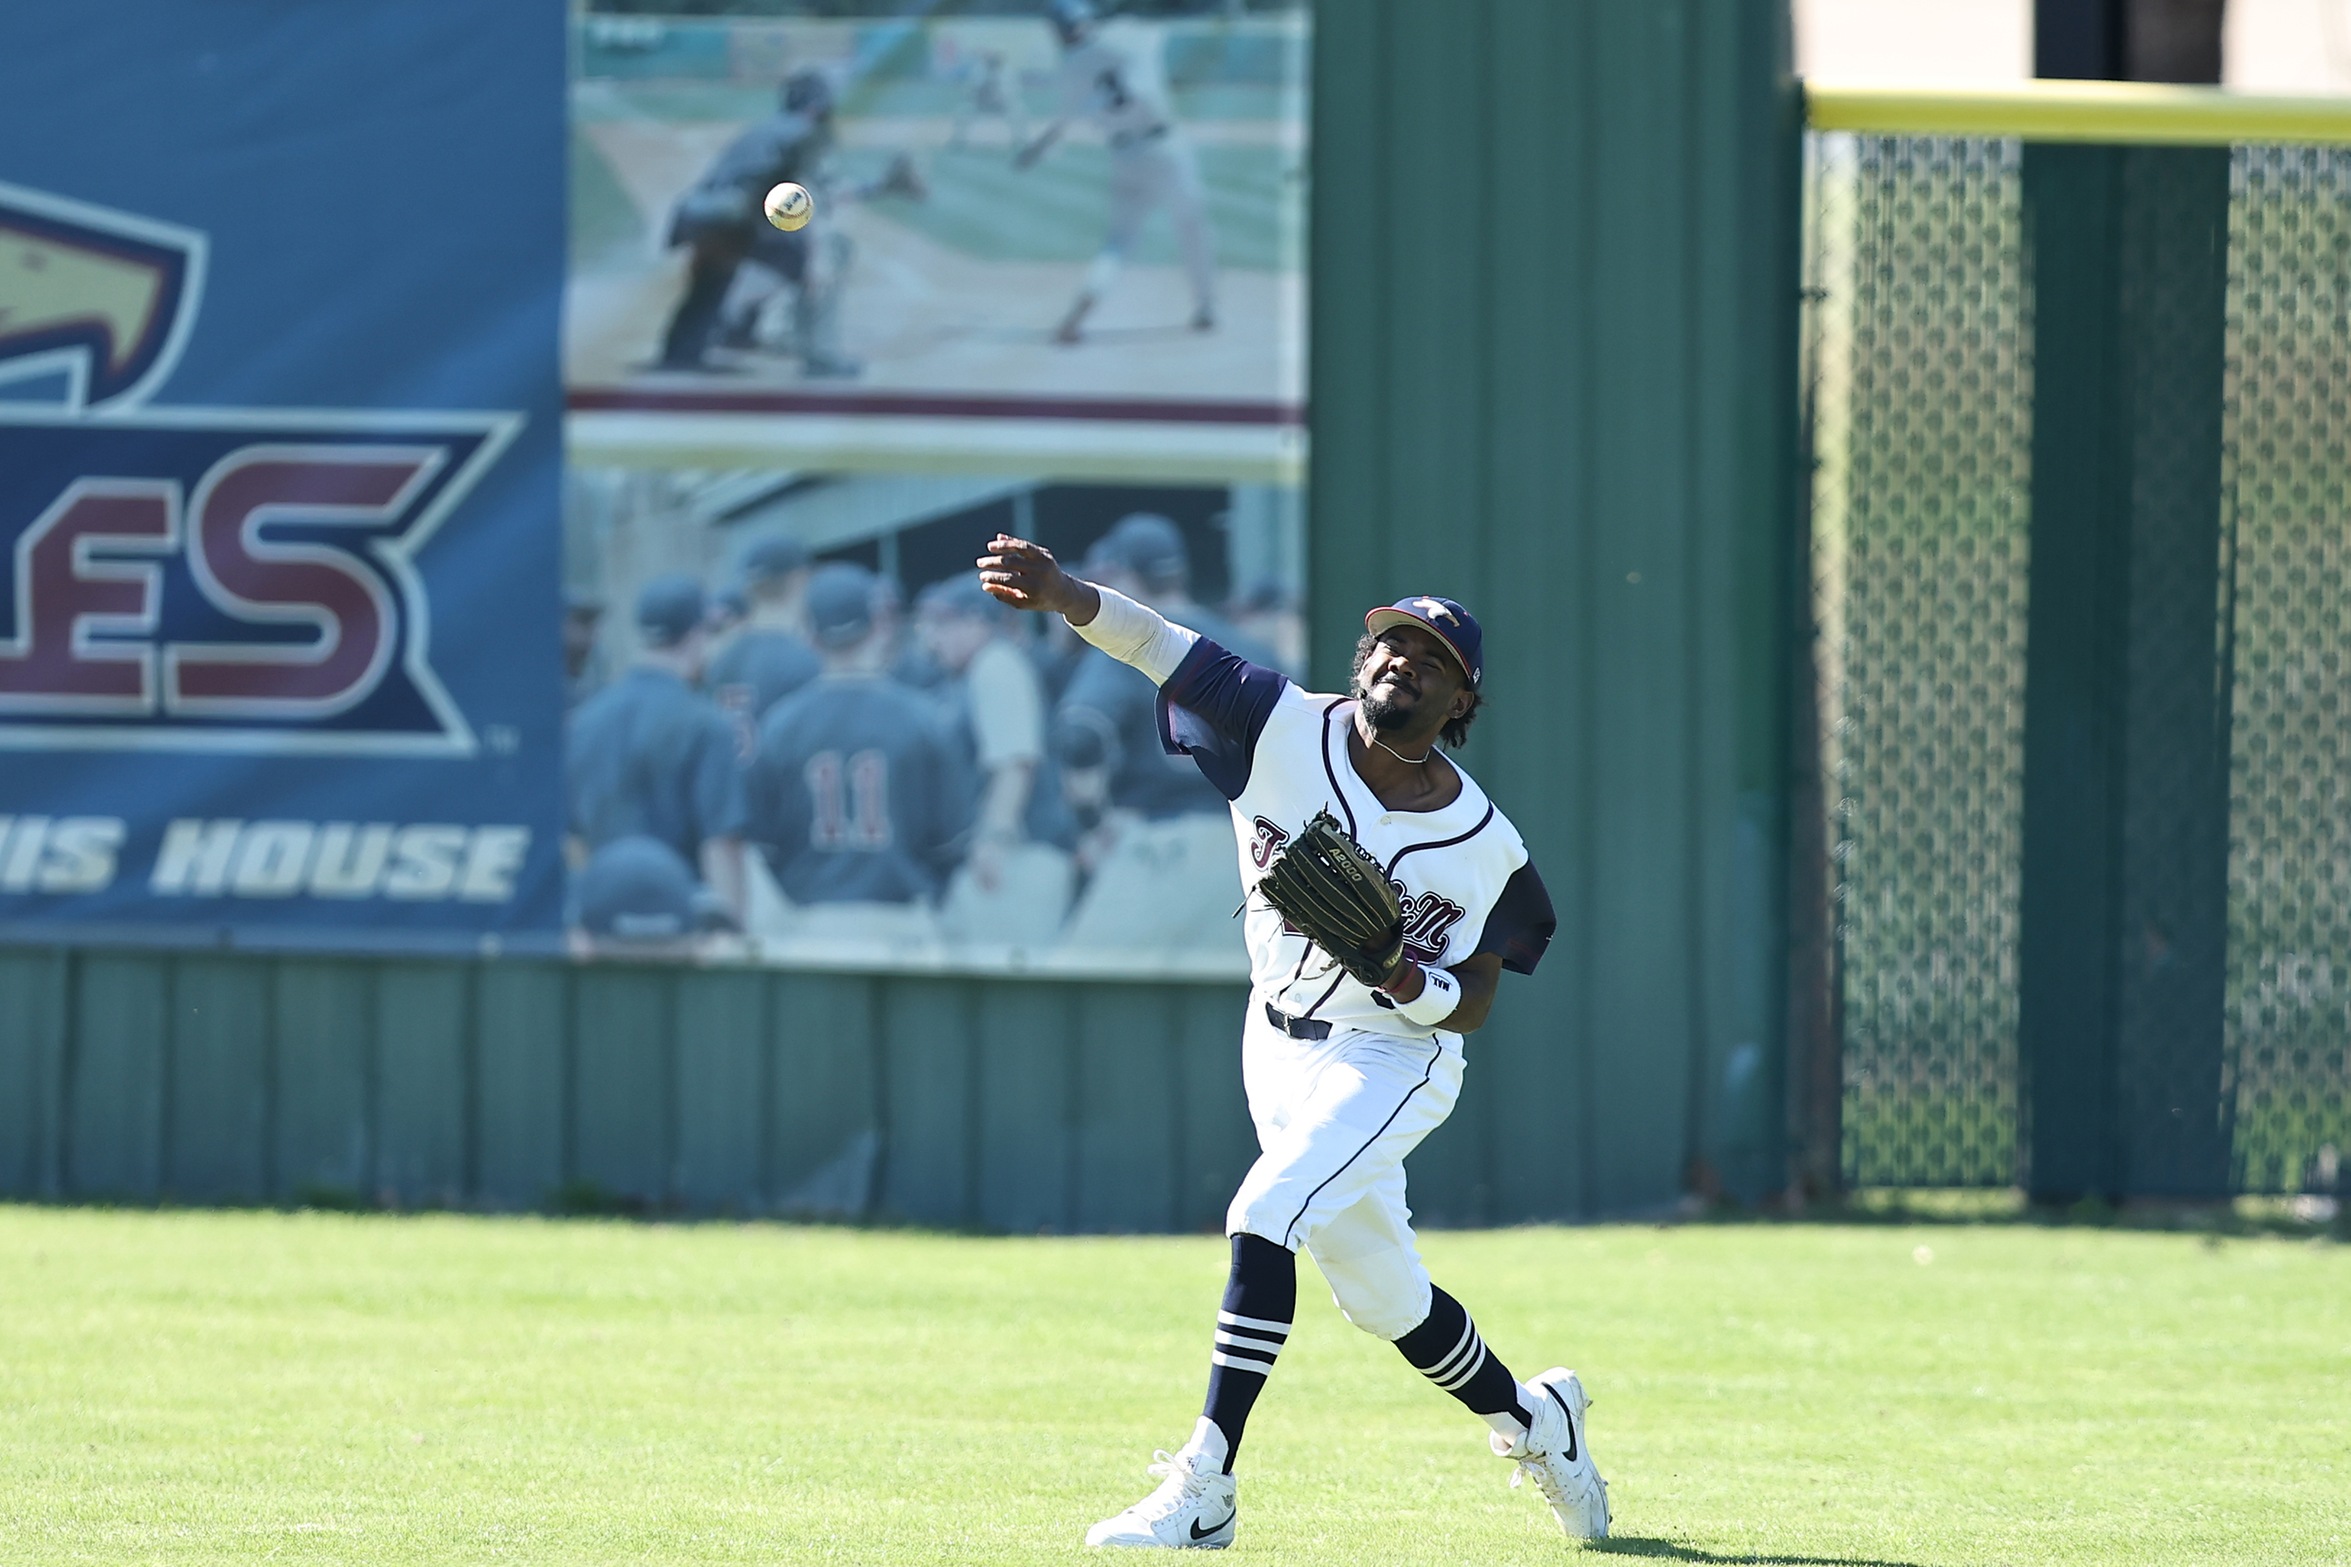 Eagles clinch series with walk-off win over Huston-Tillotson